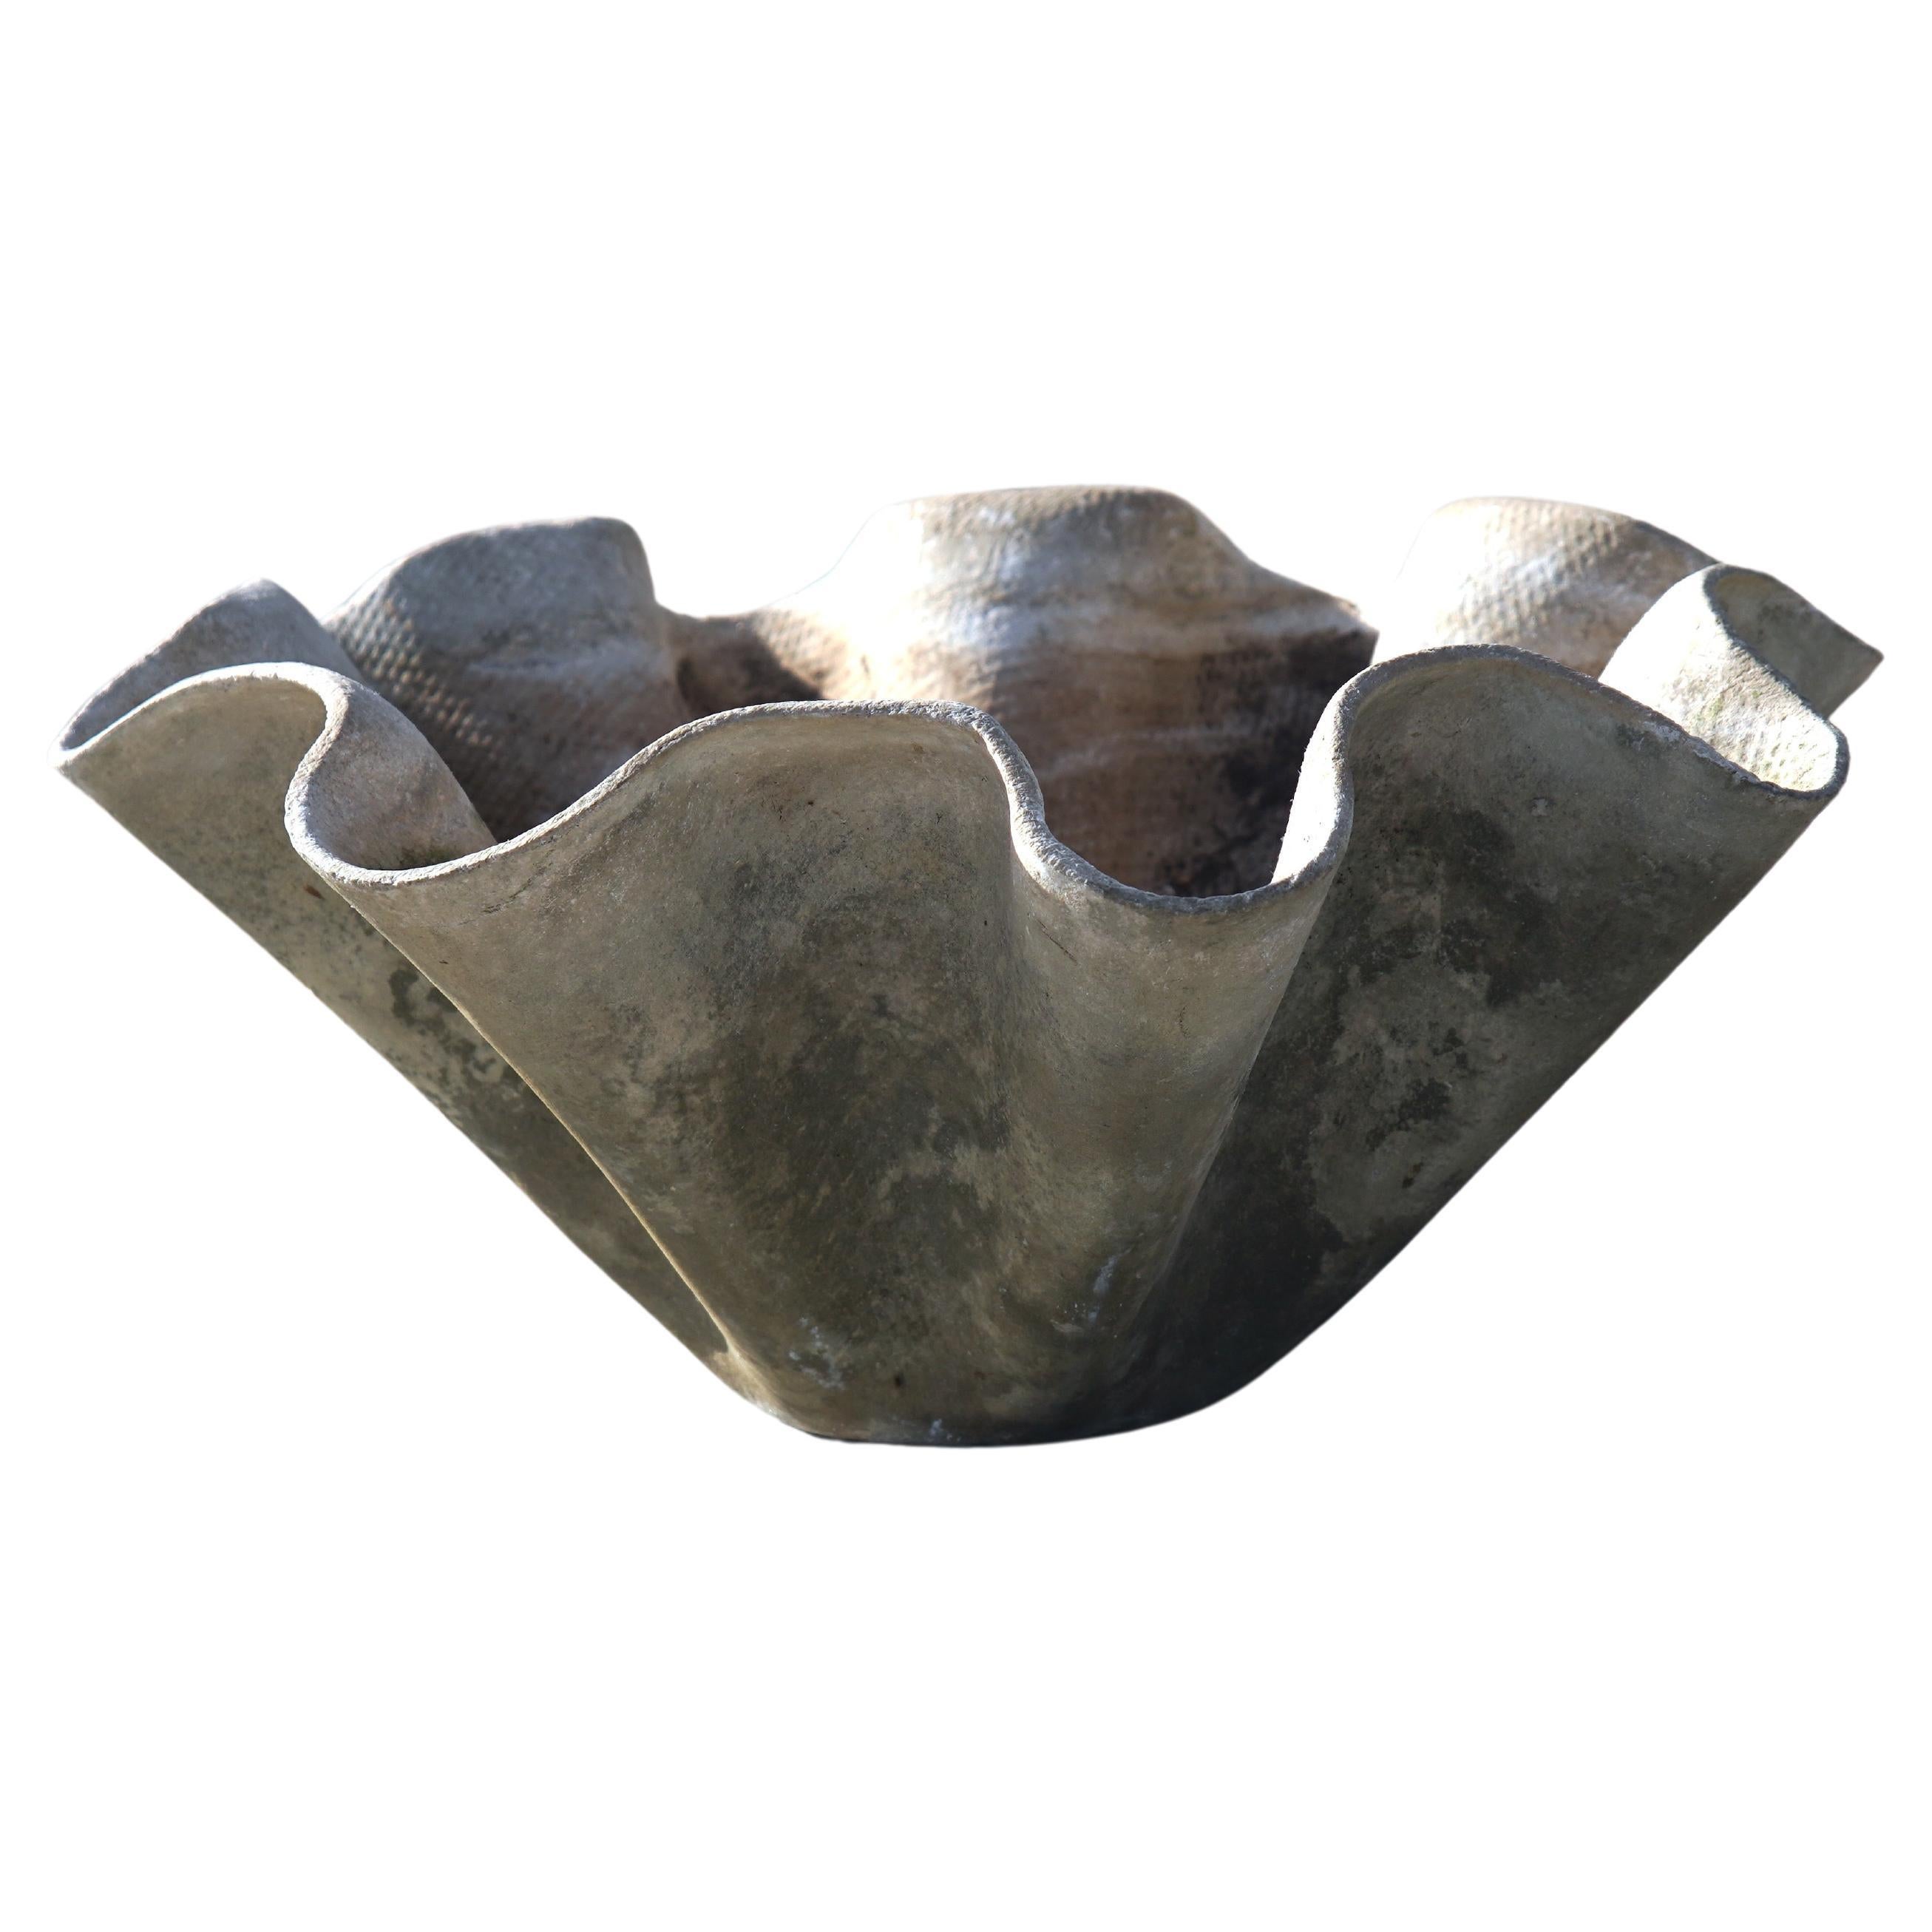 Willy Guhl Biomorphic Planters, 1960s Switzerland (Multiple Available) For Sale